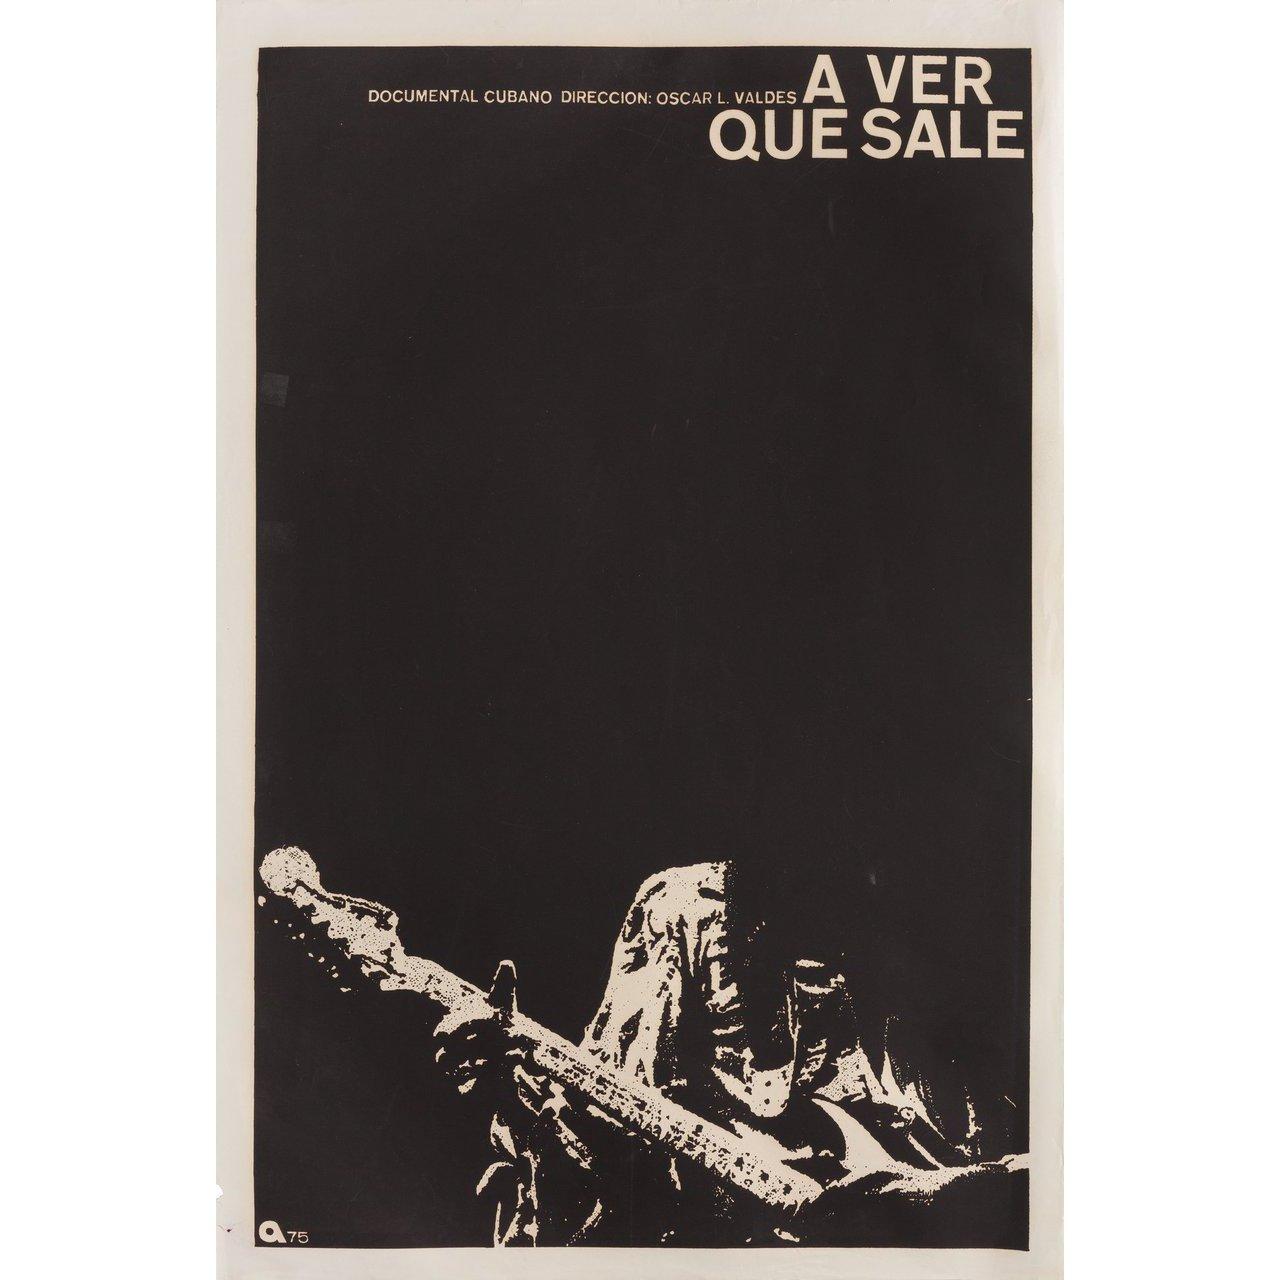 Original 1975 Cuban poster by Rene Azcuy for the first Cuban theatrical release of the documentary film A ver que sale directed by Oscar Valdes. Very Good-Fine condition, rolled. Please note: the size is stated in inches and the actual size can vary